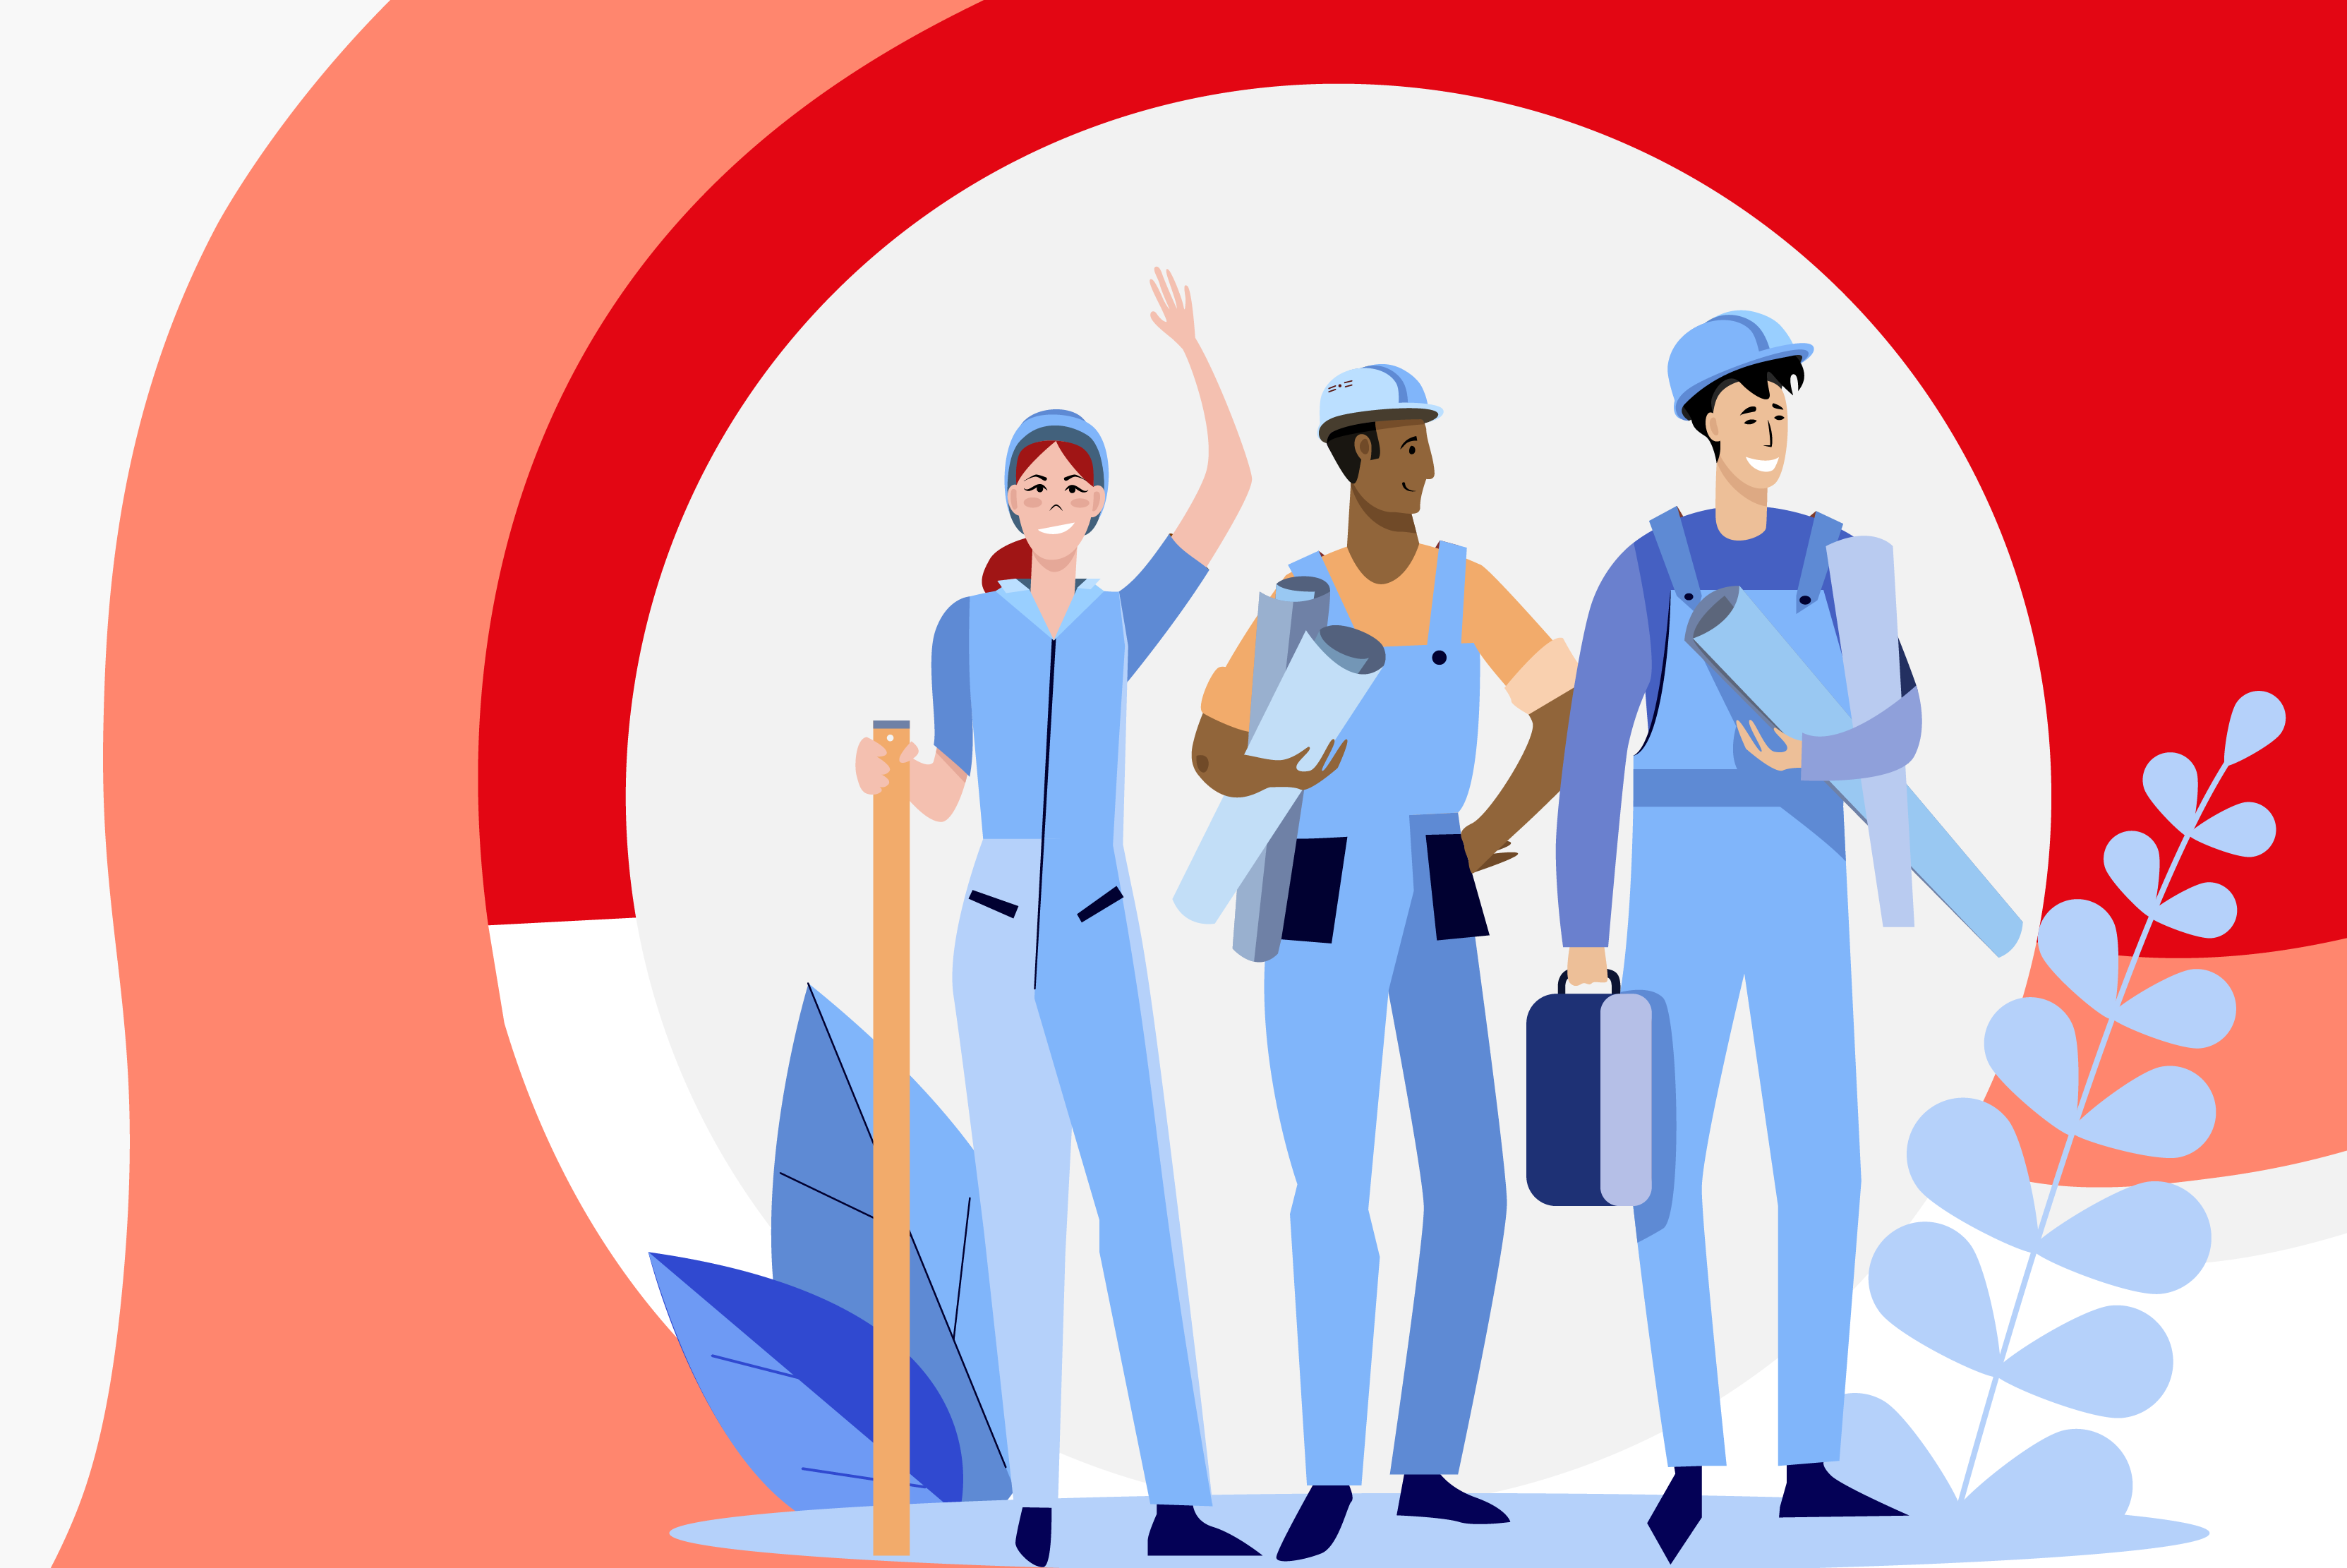 Illustration Comicstyle: One female worker and two male workers are waving with their hands